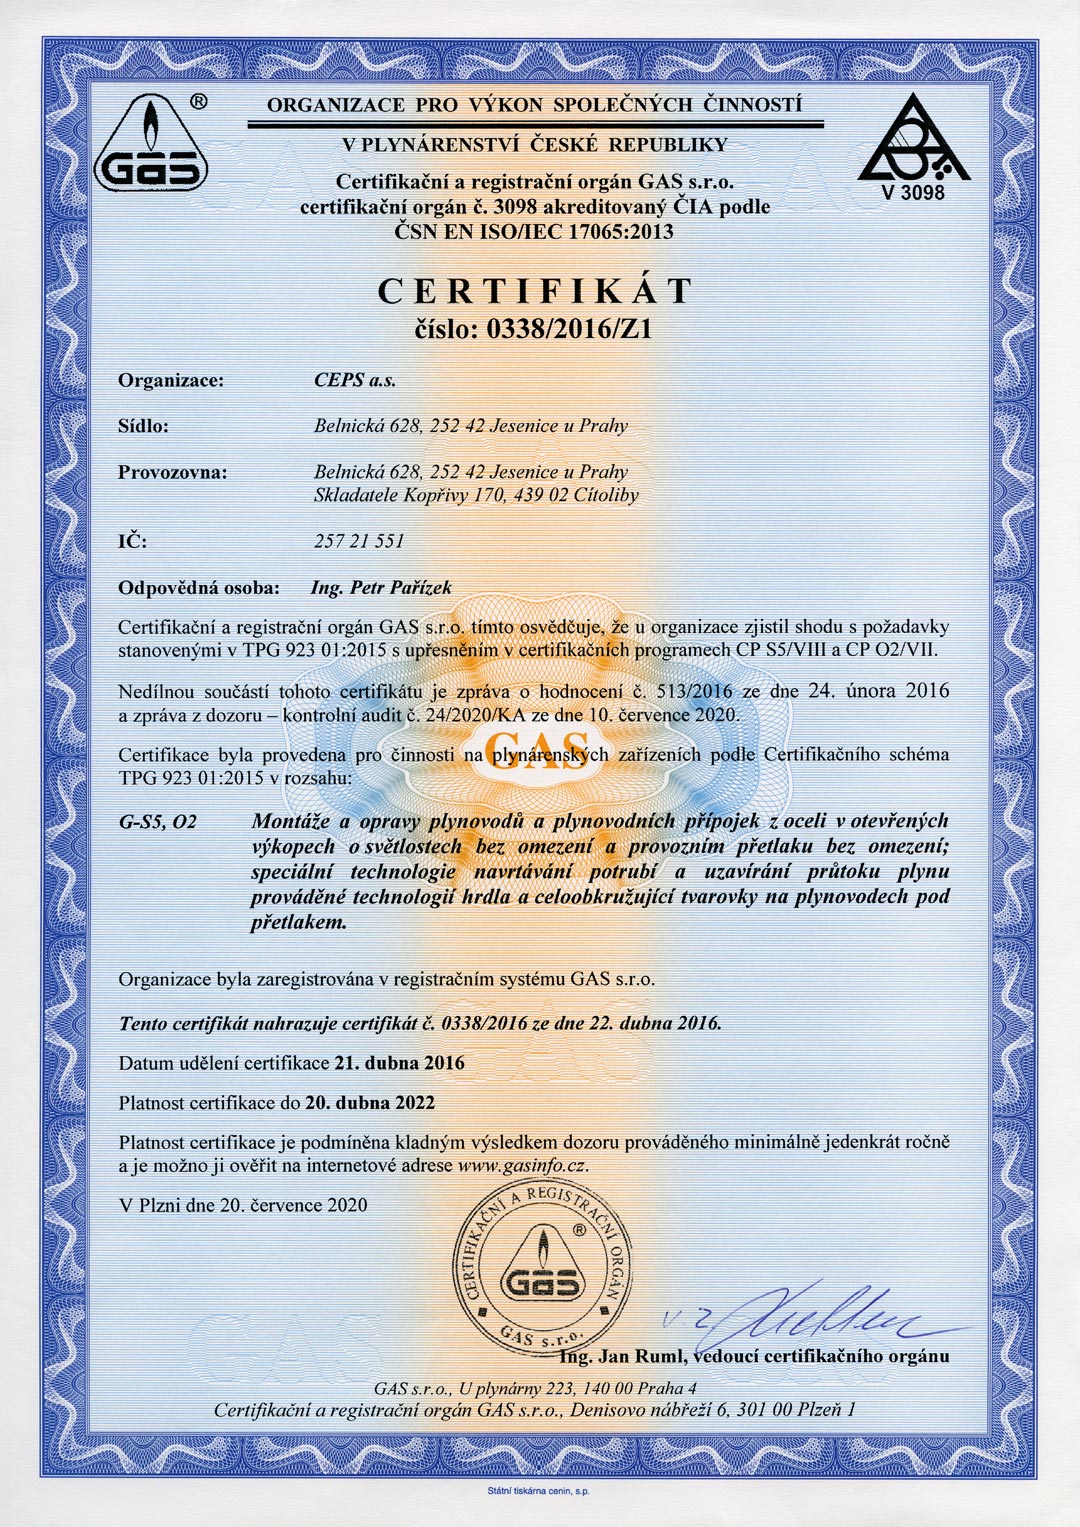 Certificate of the company certified and registered in the system GAS